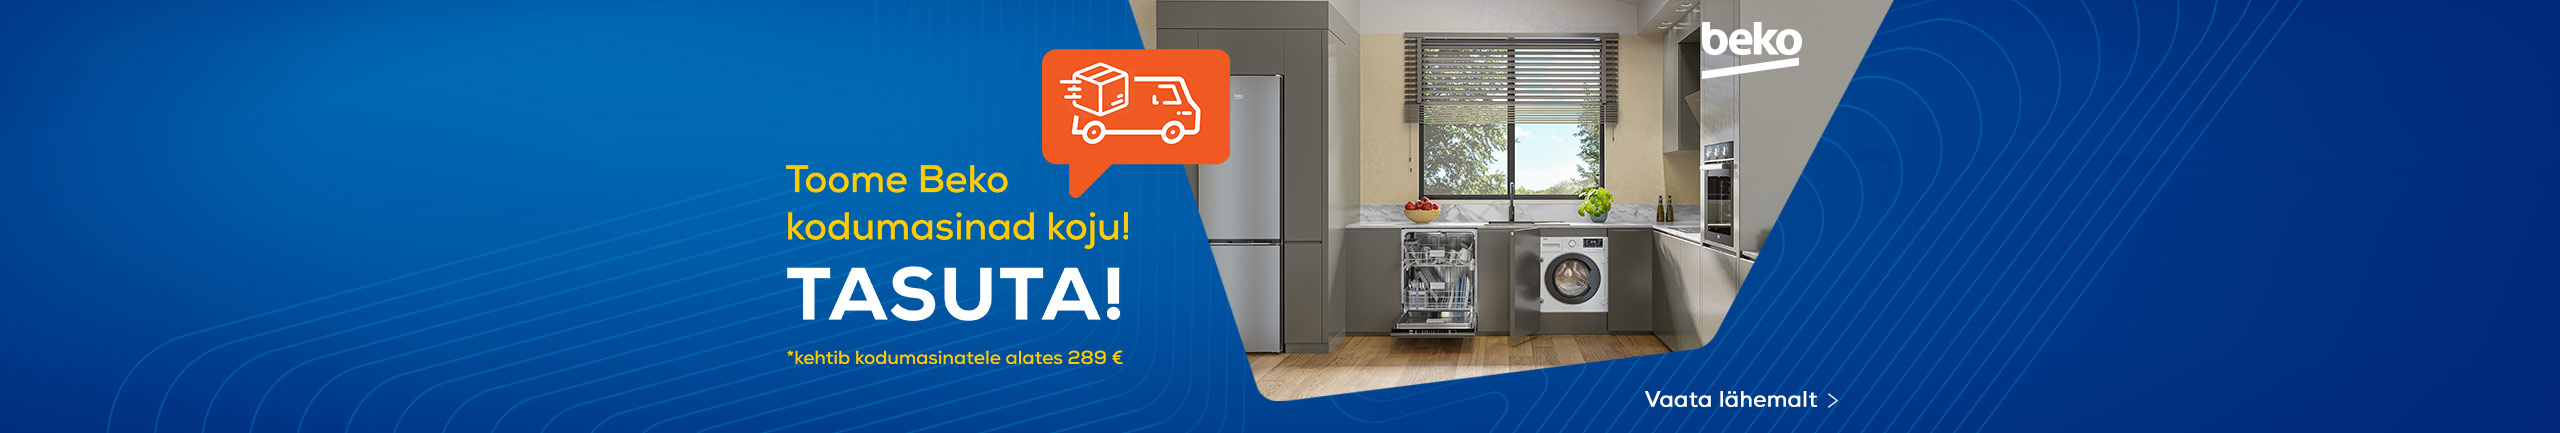 Free delivery for Beko home appliances!